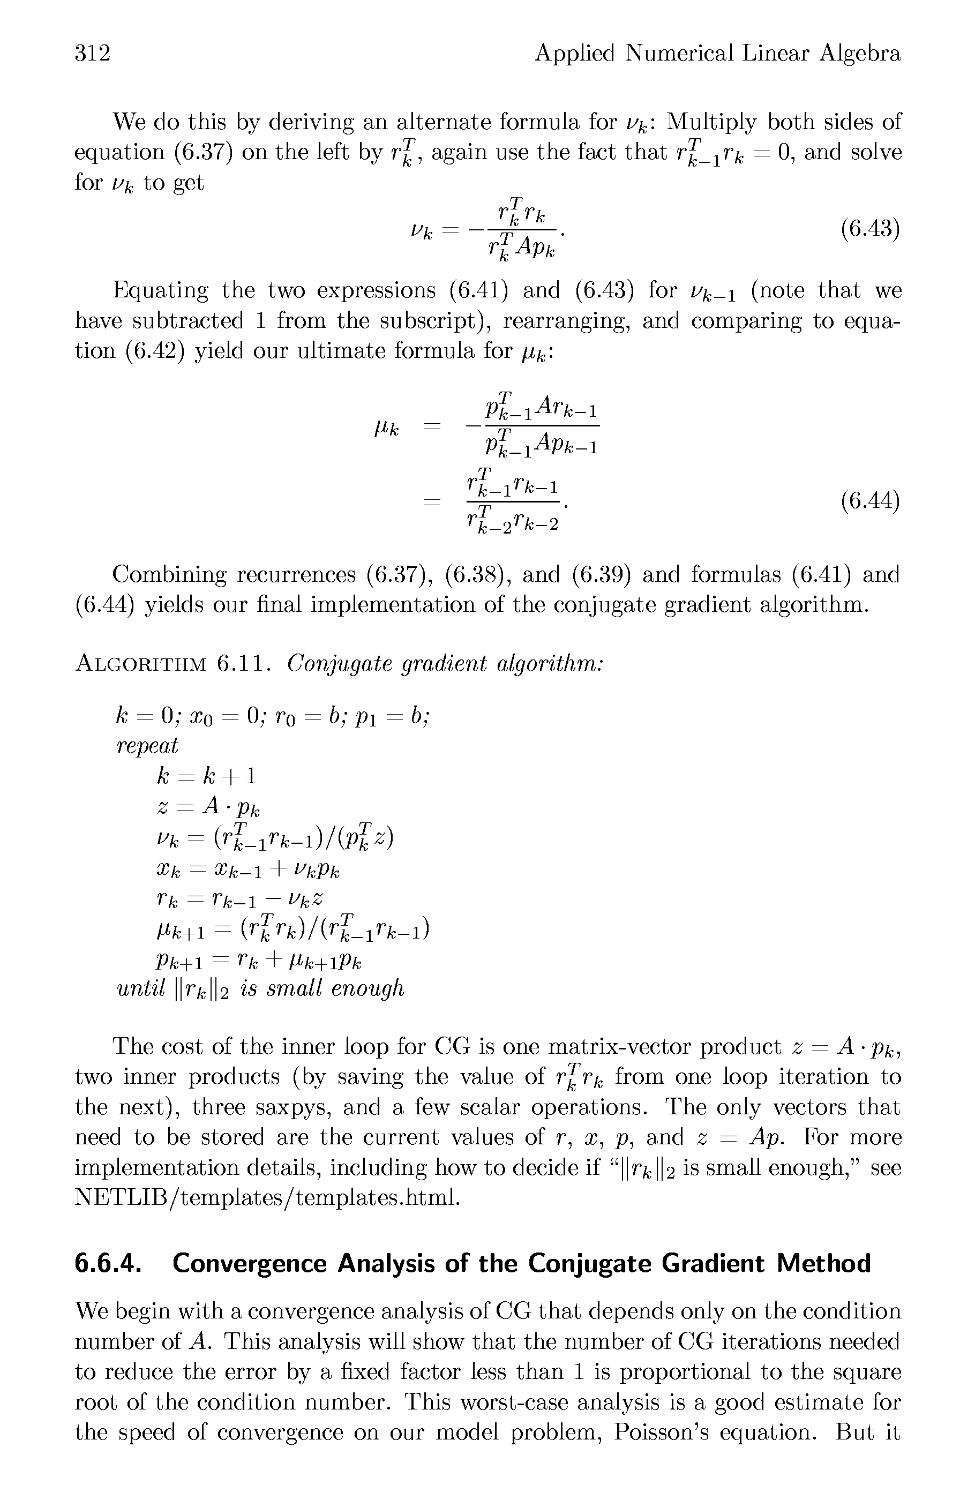 6.6.4 Convergence Analysis of the Conjugate Gradient Method